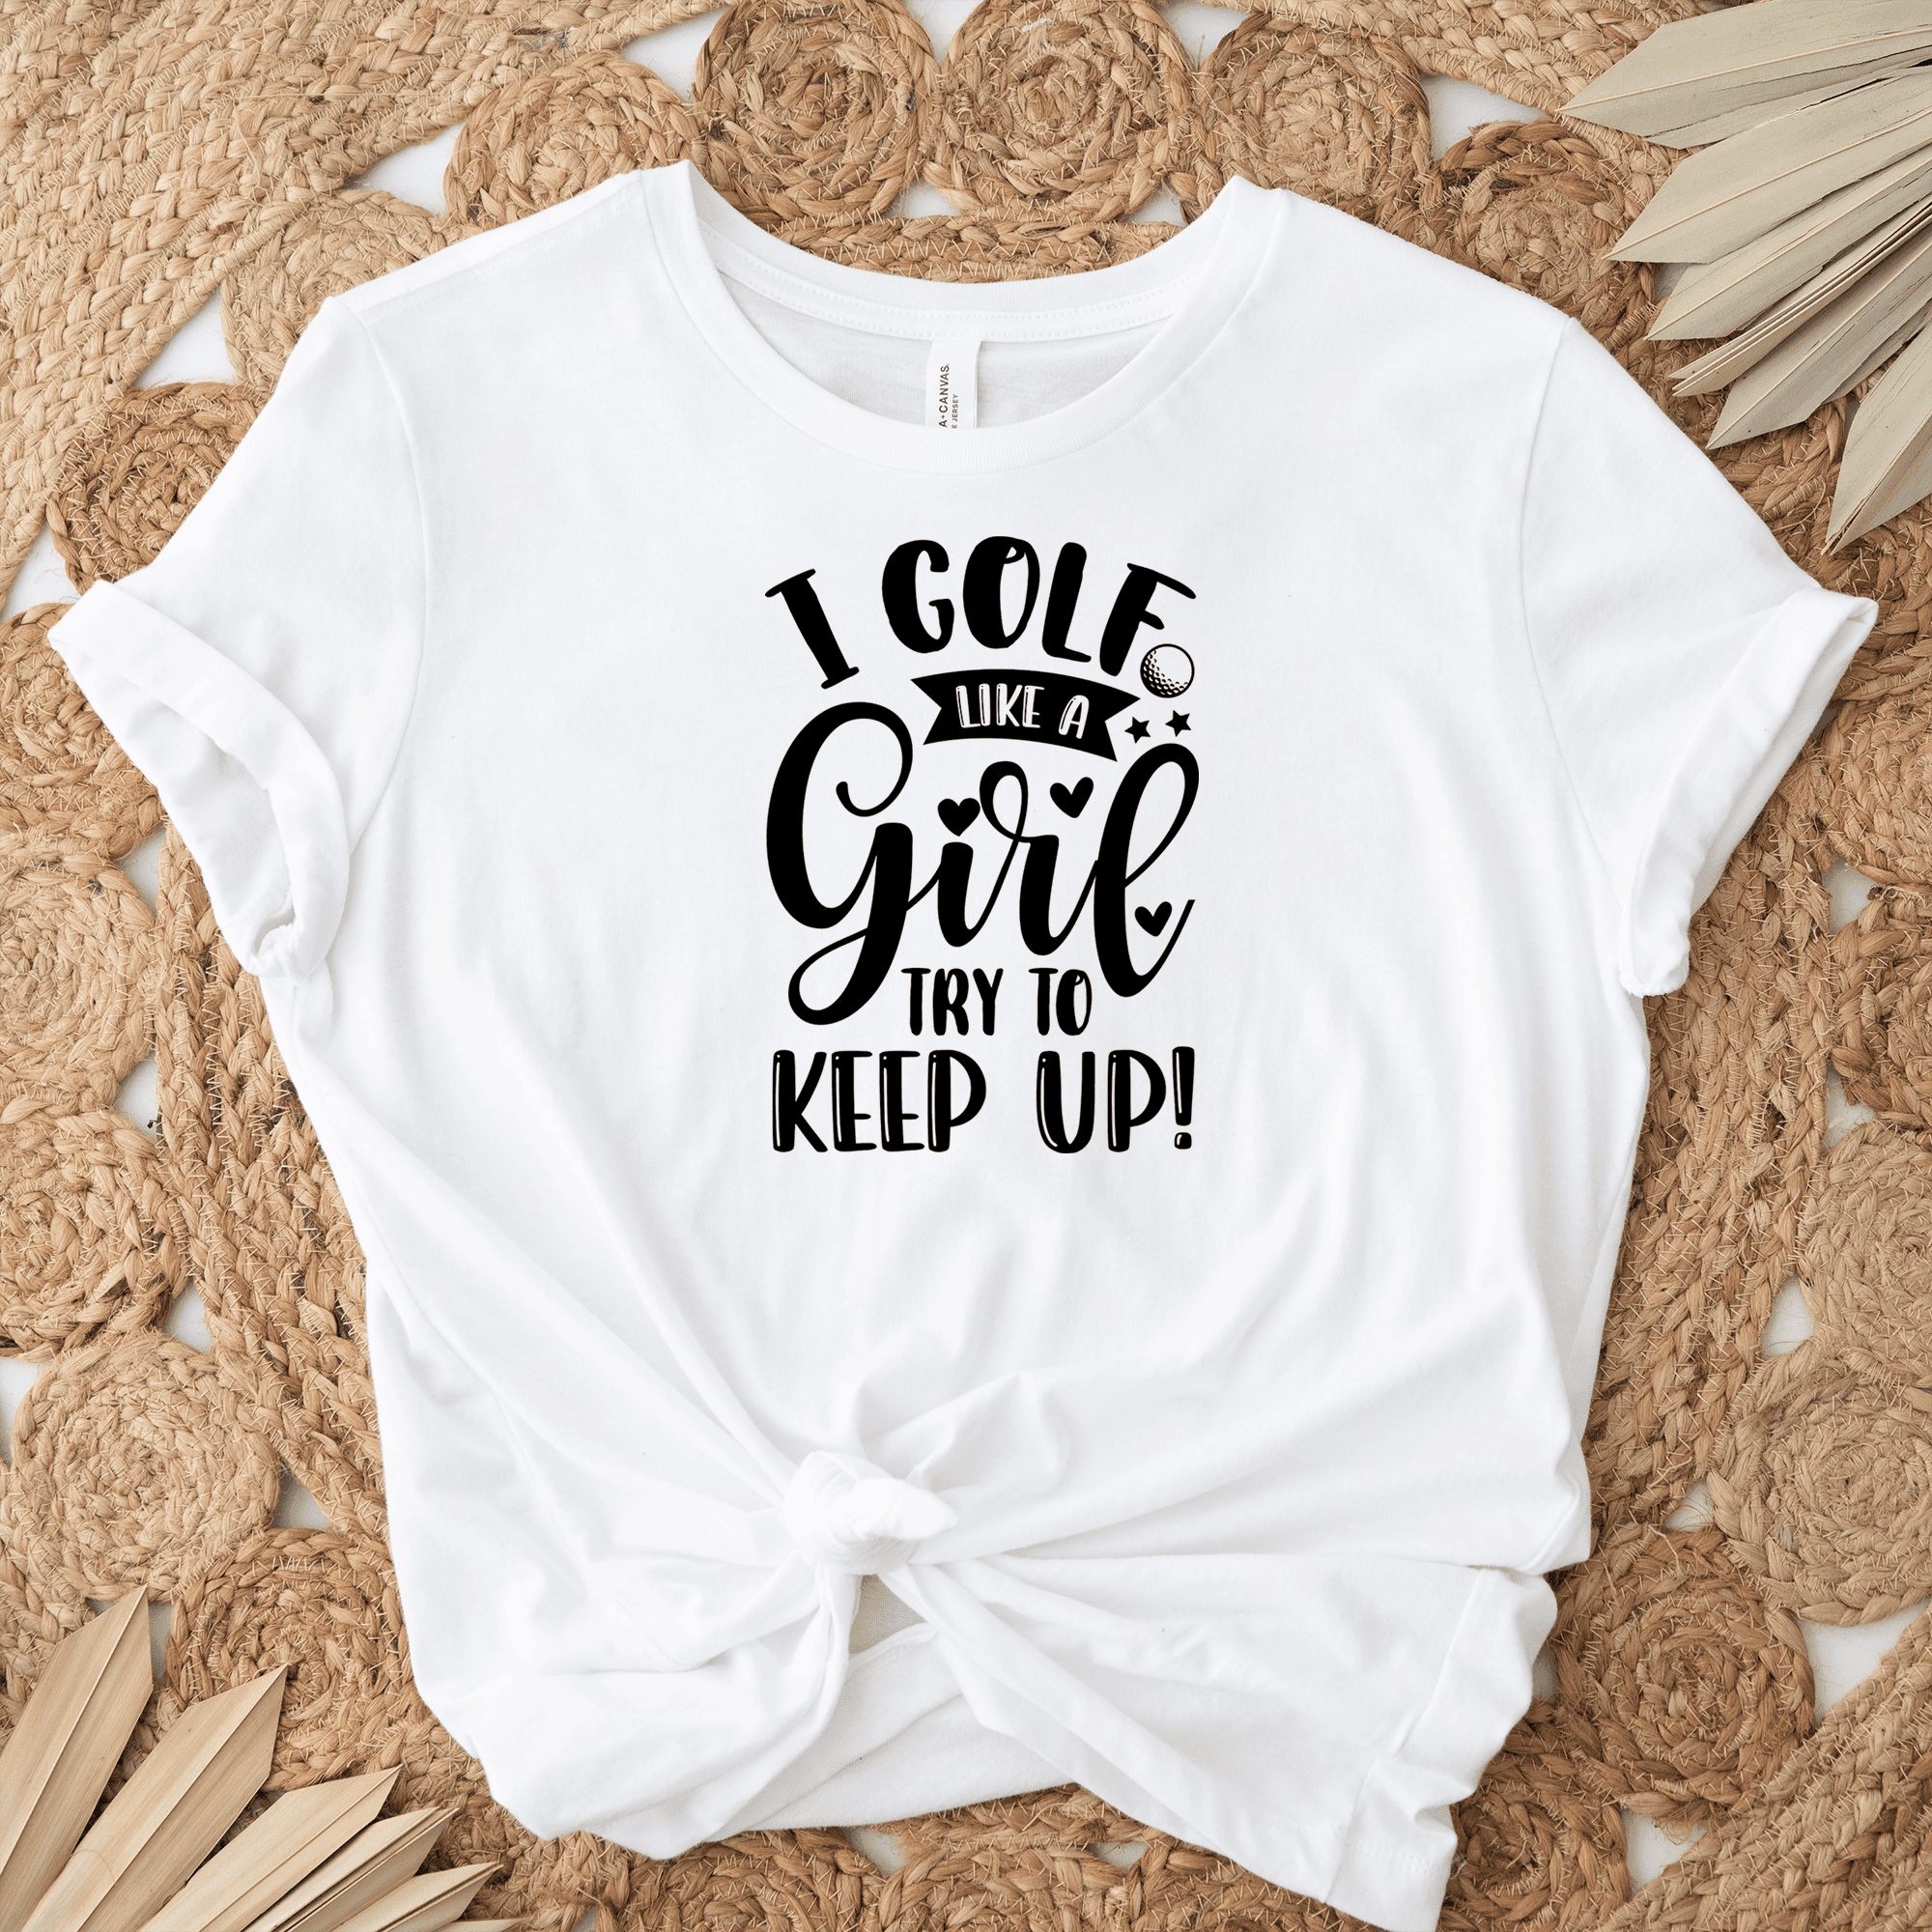 Womens White T Shirt with Keep-Up-With-The-Girl design